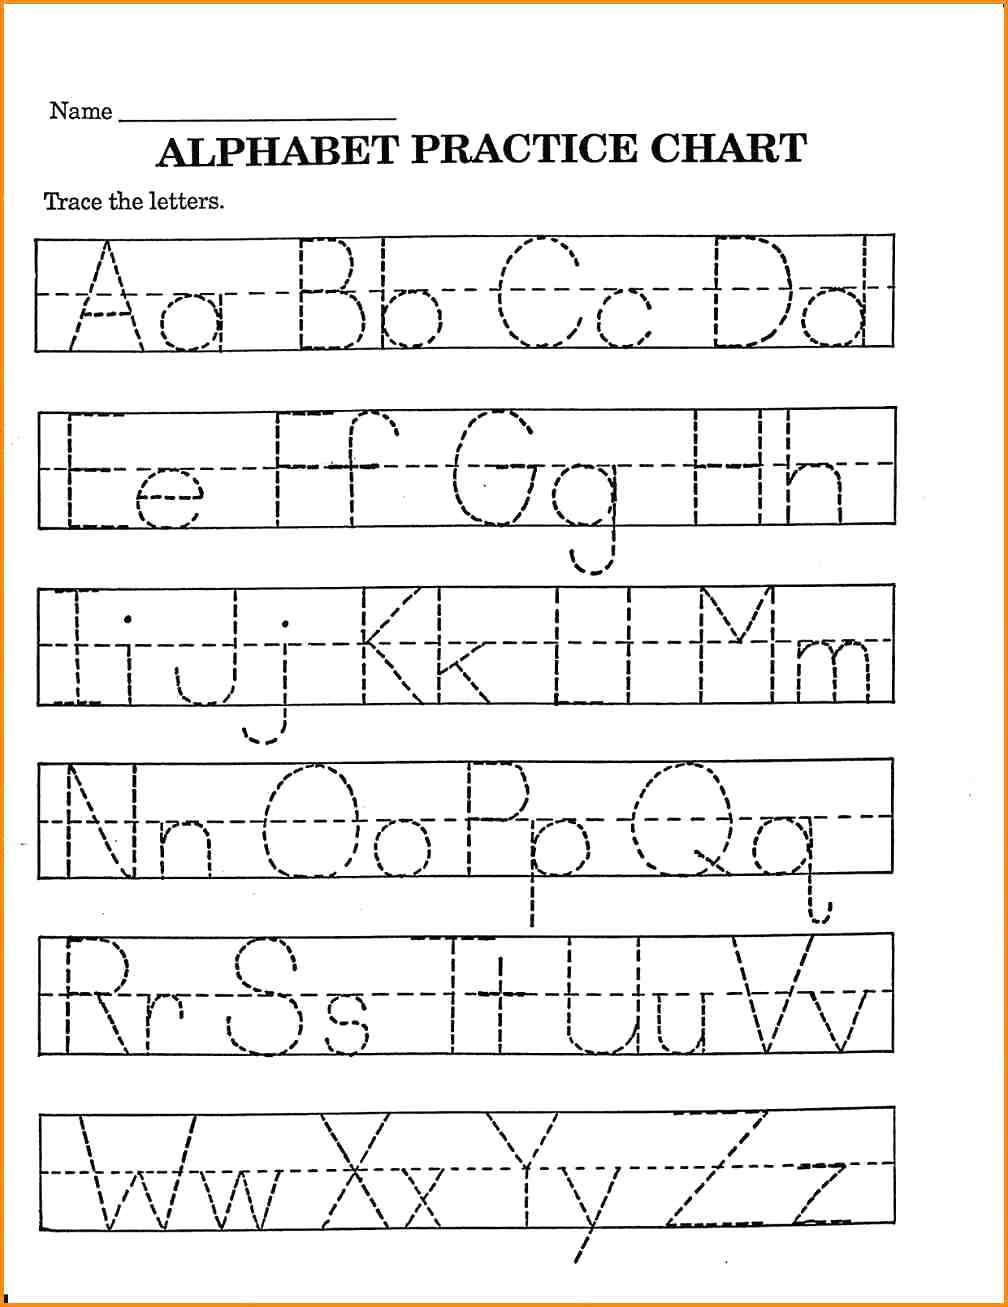 Abc Worksheets Pdf 9 Worksheets For K Western Worksheets Abc with Alphabet Tracing And Writing Worksheets Pdf